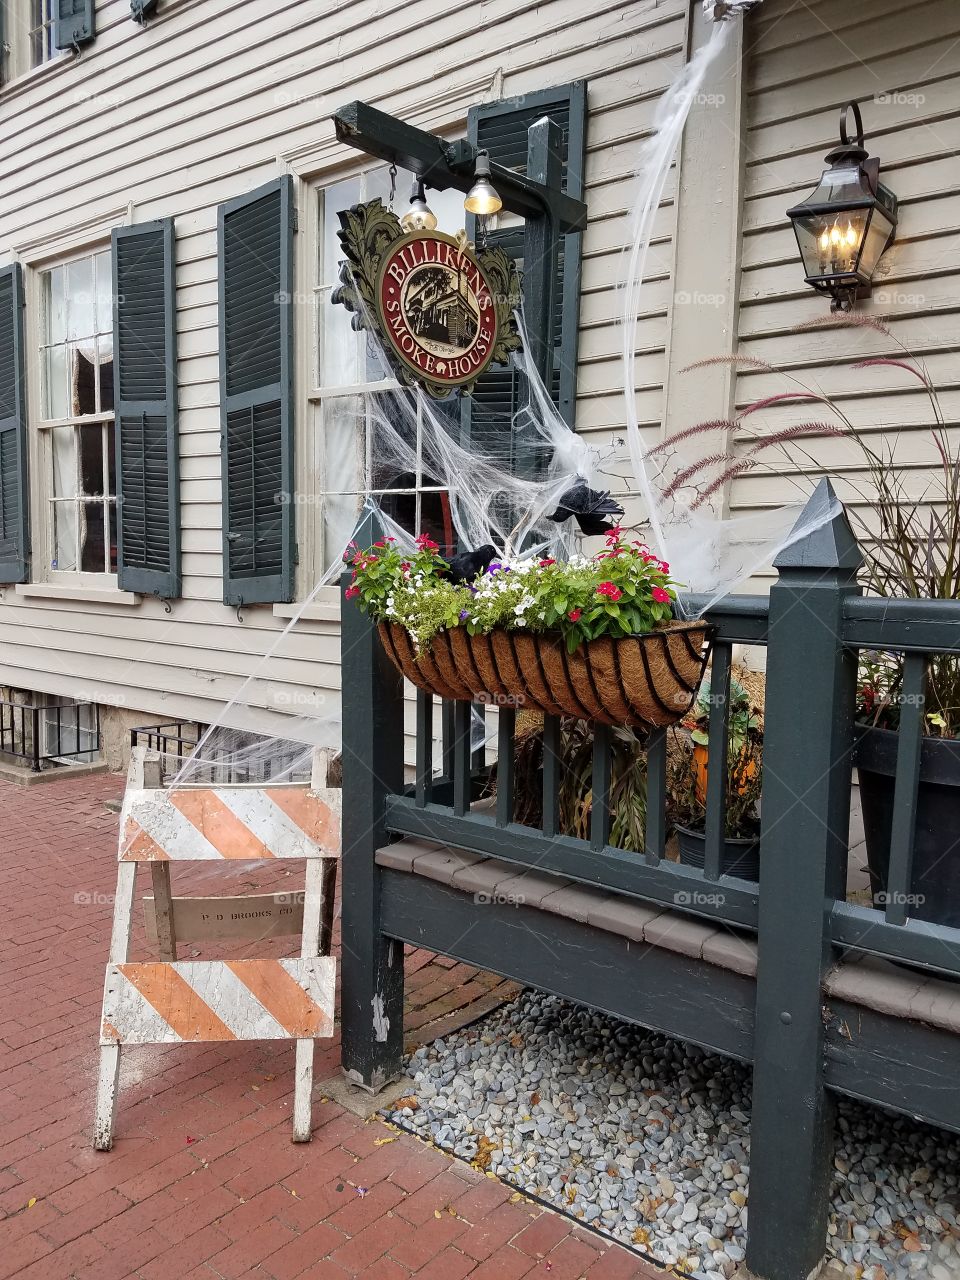 Historical Building ready for Halloween